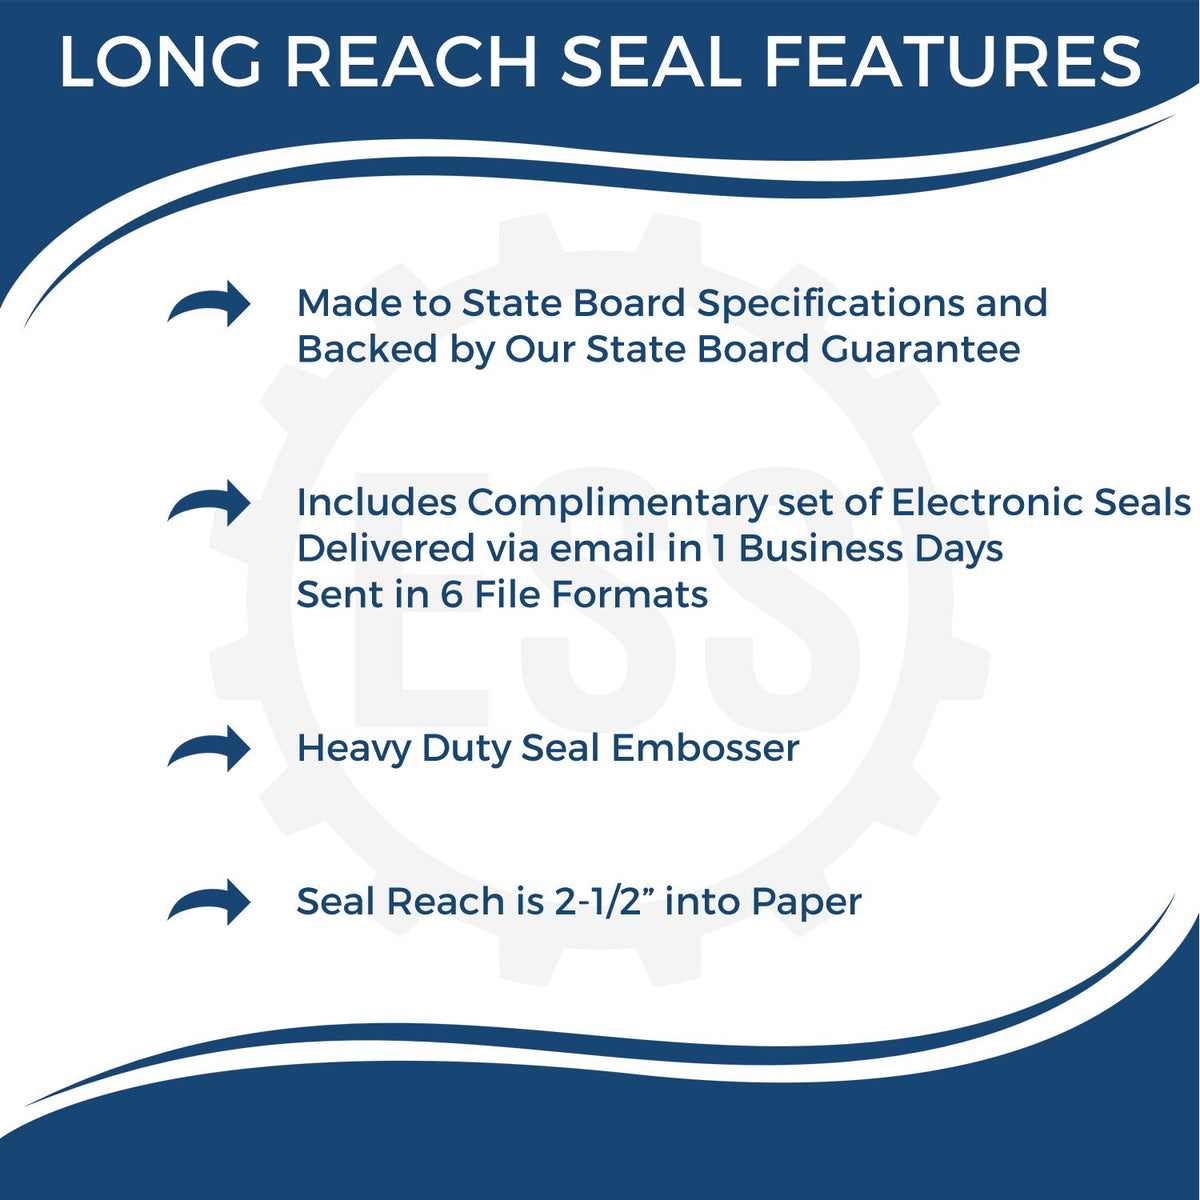 A picture of an infographic highlighting the selling points for the Long Reach Georgia Geology Seal